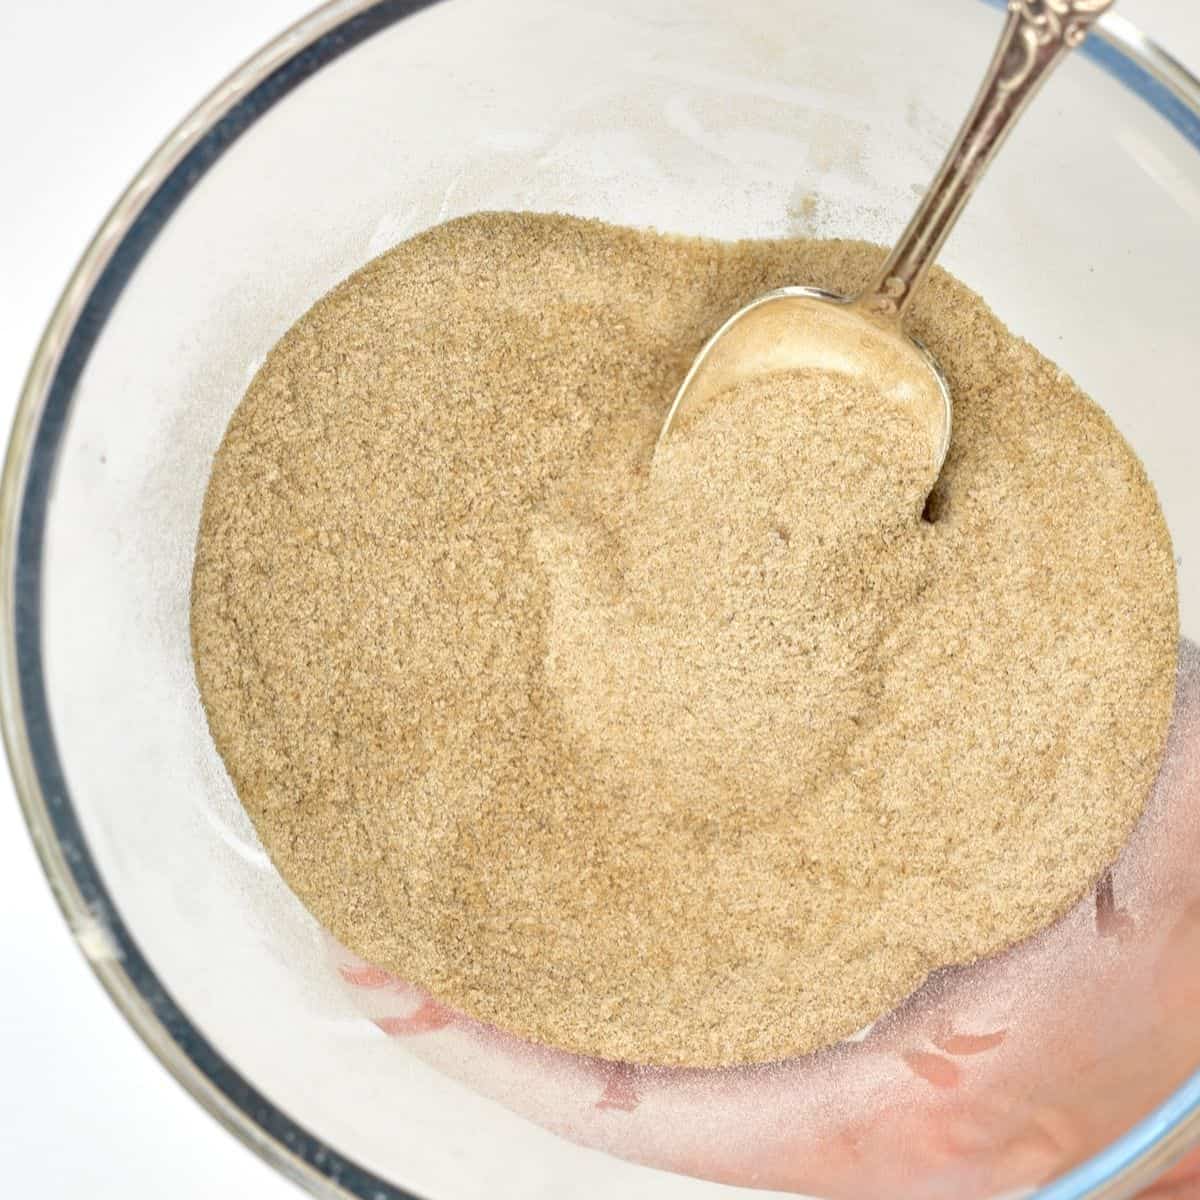 How to Make Wheat Flour and Other Flours - Health Tips